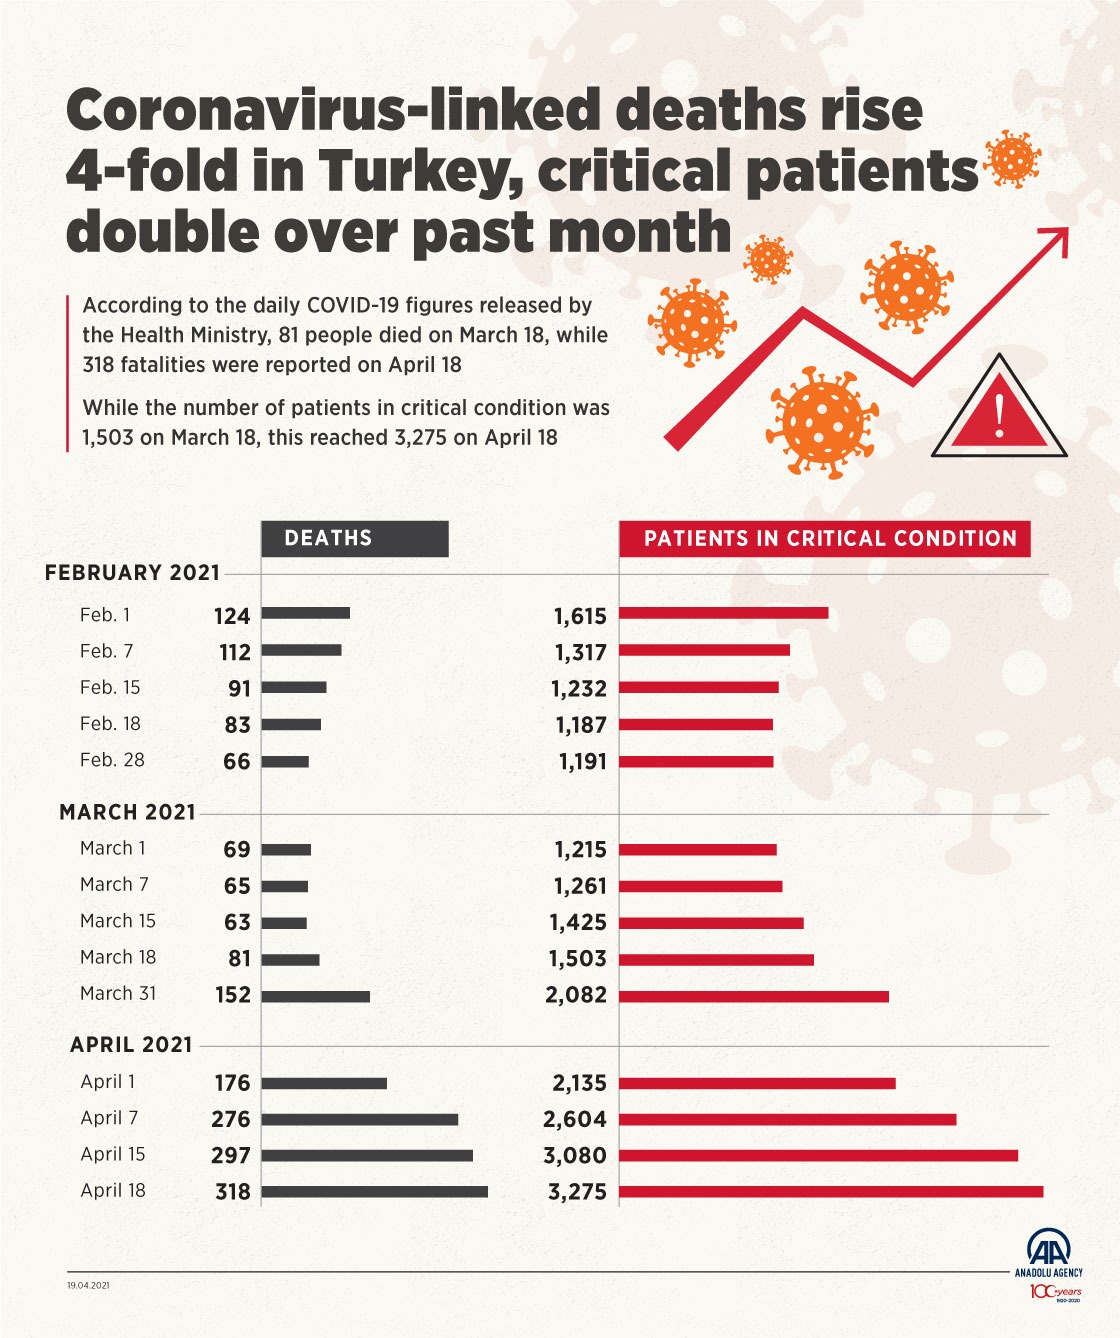 Coronavirus-linked deaths rise 4-fold in Turkey, critical patients double over past month